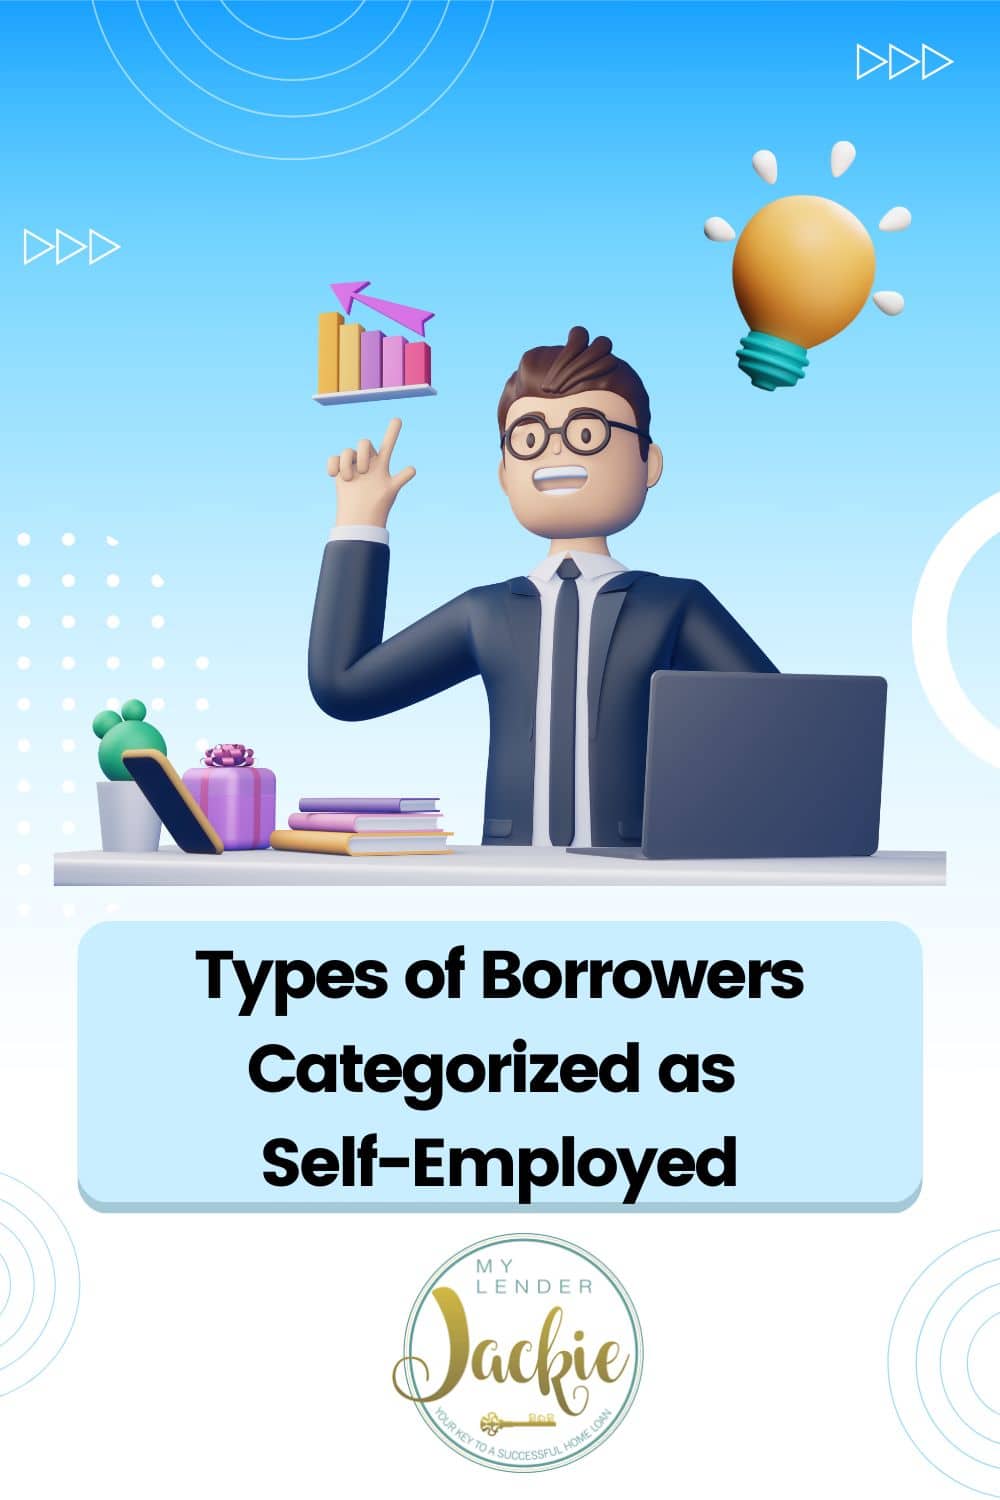 Types of Borrowers Categorized as Self-Employed